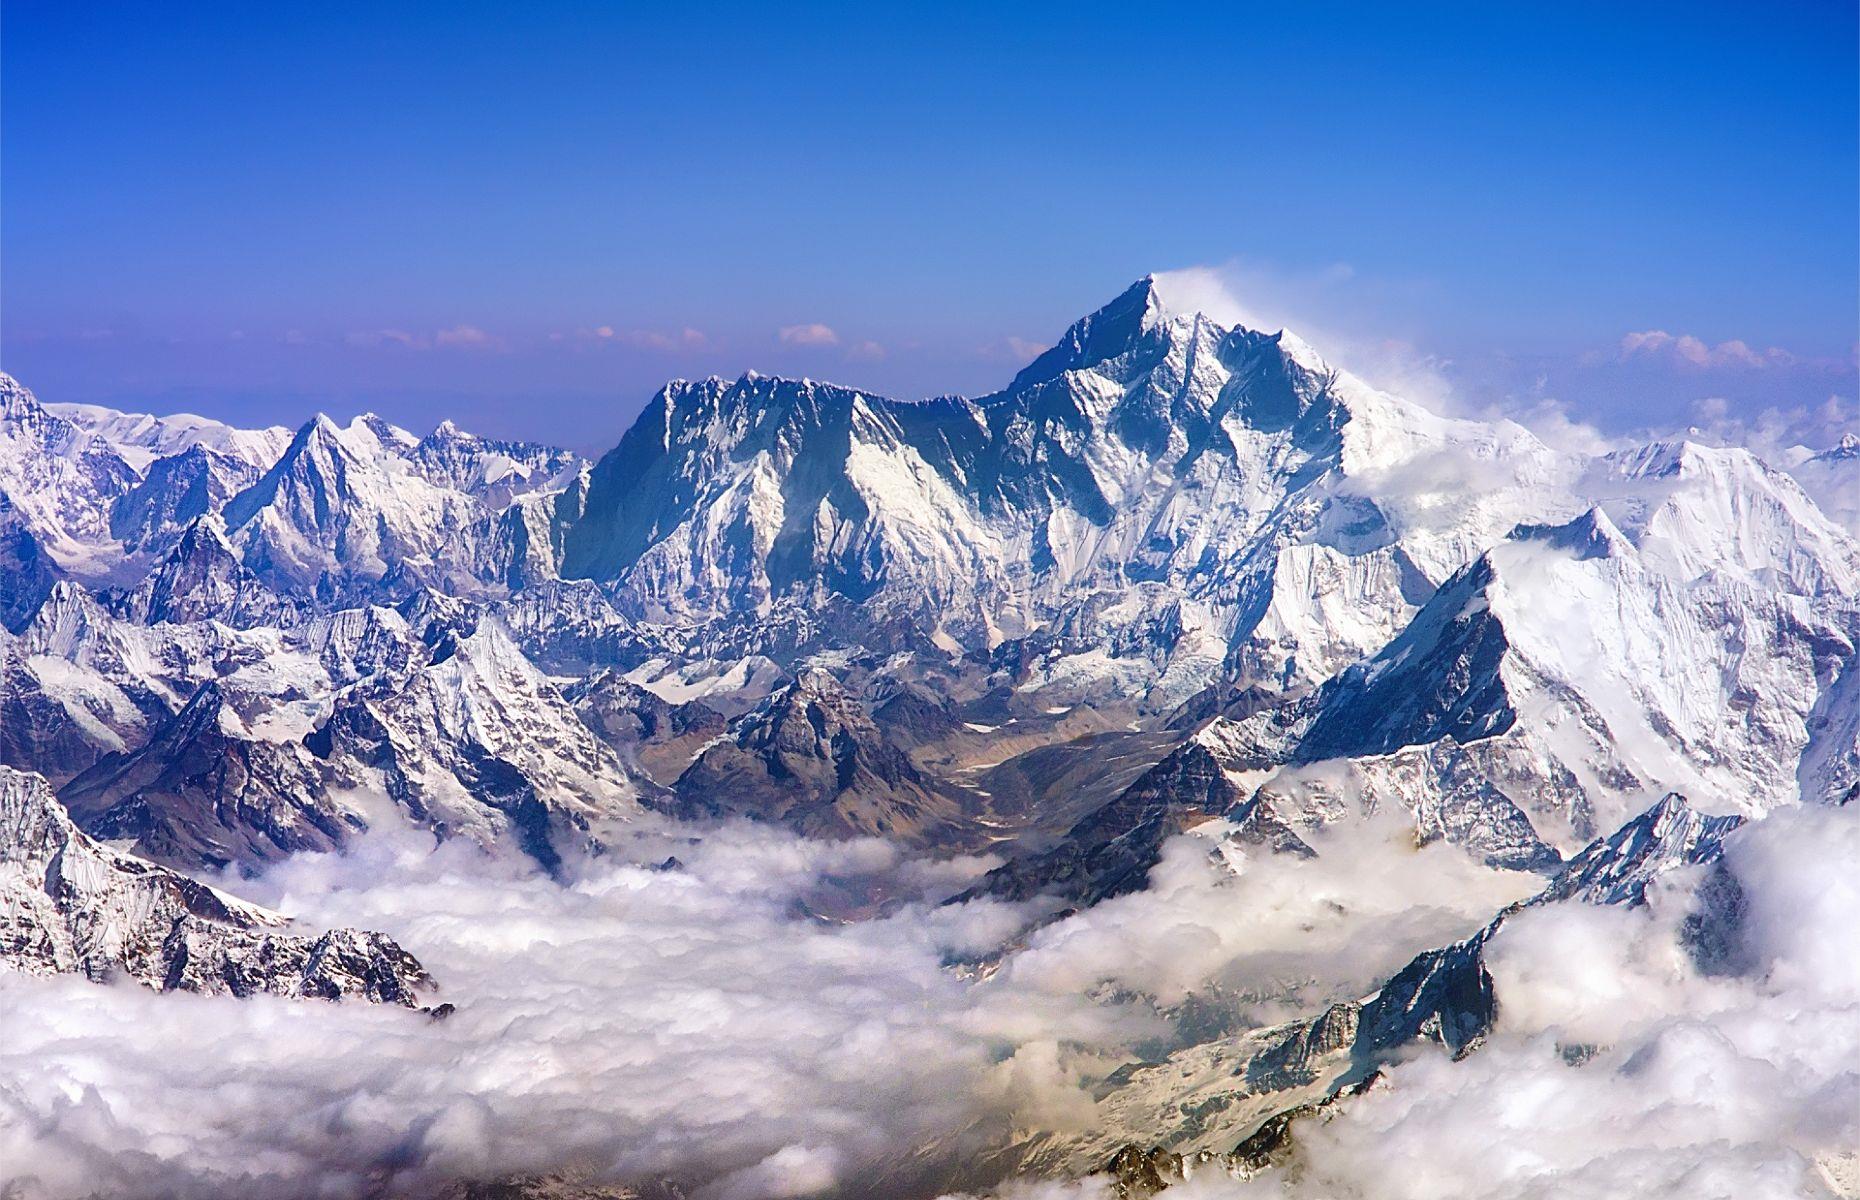 <p>With their legendary, time-honored beauty, the Himalayas grace the wish lists of travelers all over the world. But climate change and tourism represent two of the biggest challenges on the horizon. <a href="https://www.nationalgeographic.com/environment/article/himalaya-mountain-climate-change-report">A report published in 2019</a> highlighted the fact that the Himalayas are warming faster than the rest of the world, spurring the retreat of glaciers, melting of permafrost and more unpredictable weather conditions in future. Ensuring the safety of climbers and Sherpas on Everest – which may mean enforcing firmer restrictions on tour operators – is another issue that should be at the forefront. </p>  <p><a href="https://www.loveexploring.com/galleries/116528/spectacular-sights-weve-lost-in-2021?page=1"><strong>Discover the spectacular sights we've lost in 2021</strong></a></p>